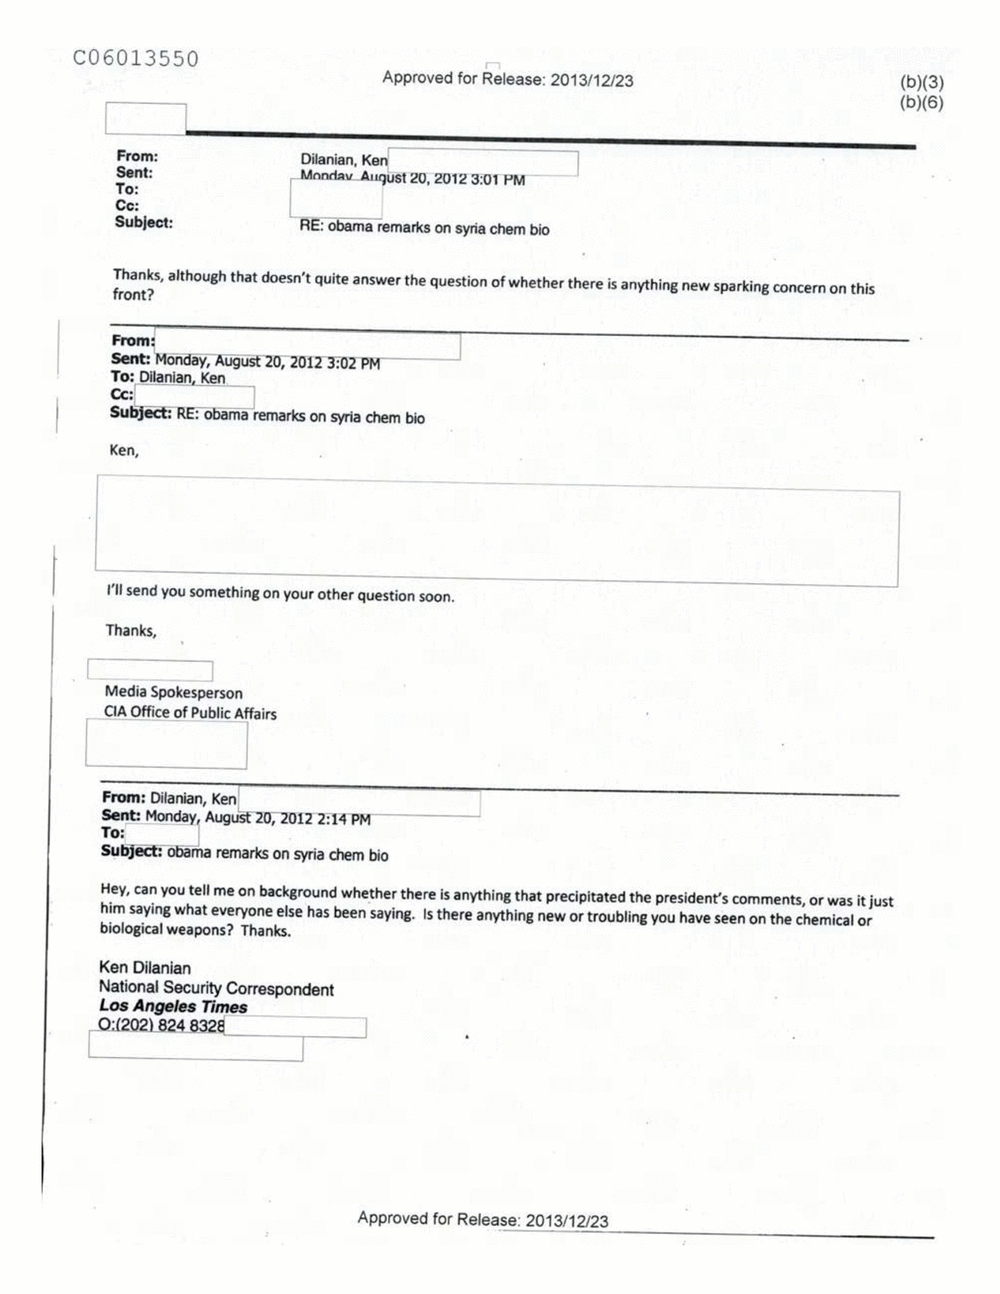 Page 413 from Email Correspondence Between Reporters and CIA Flacks